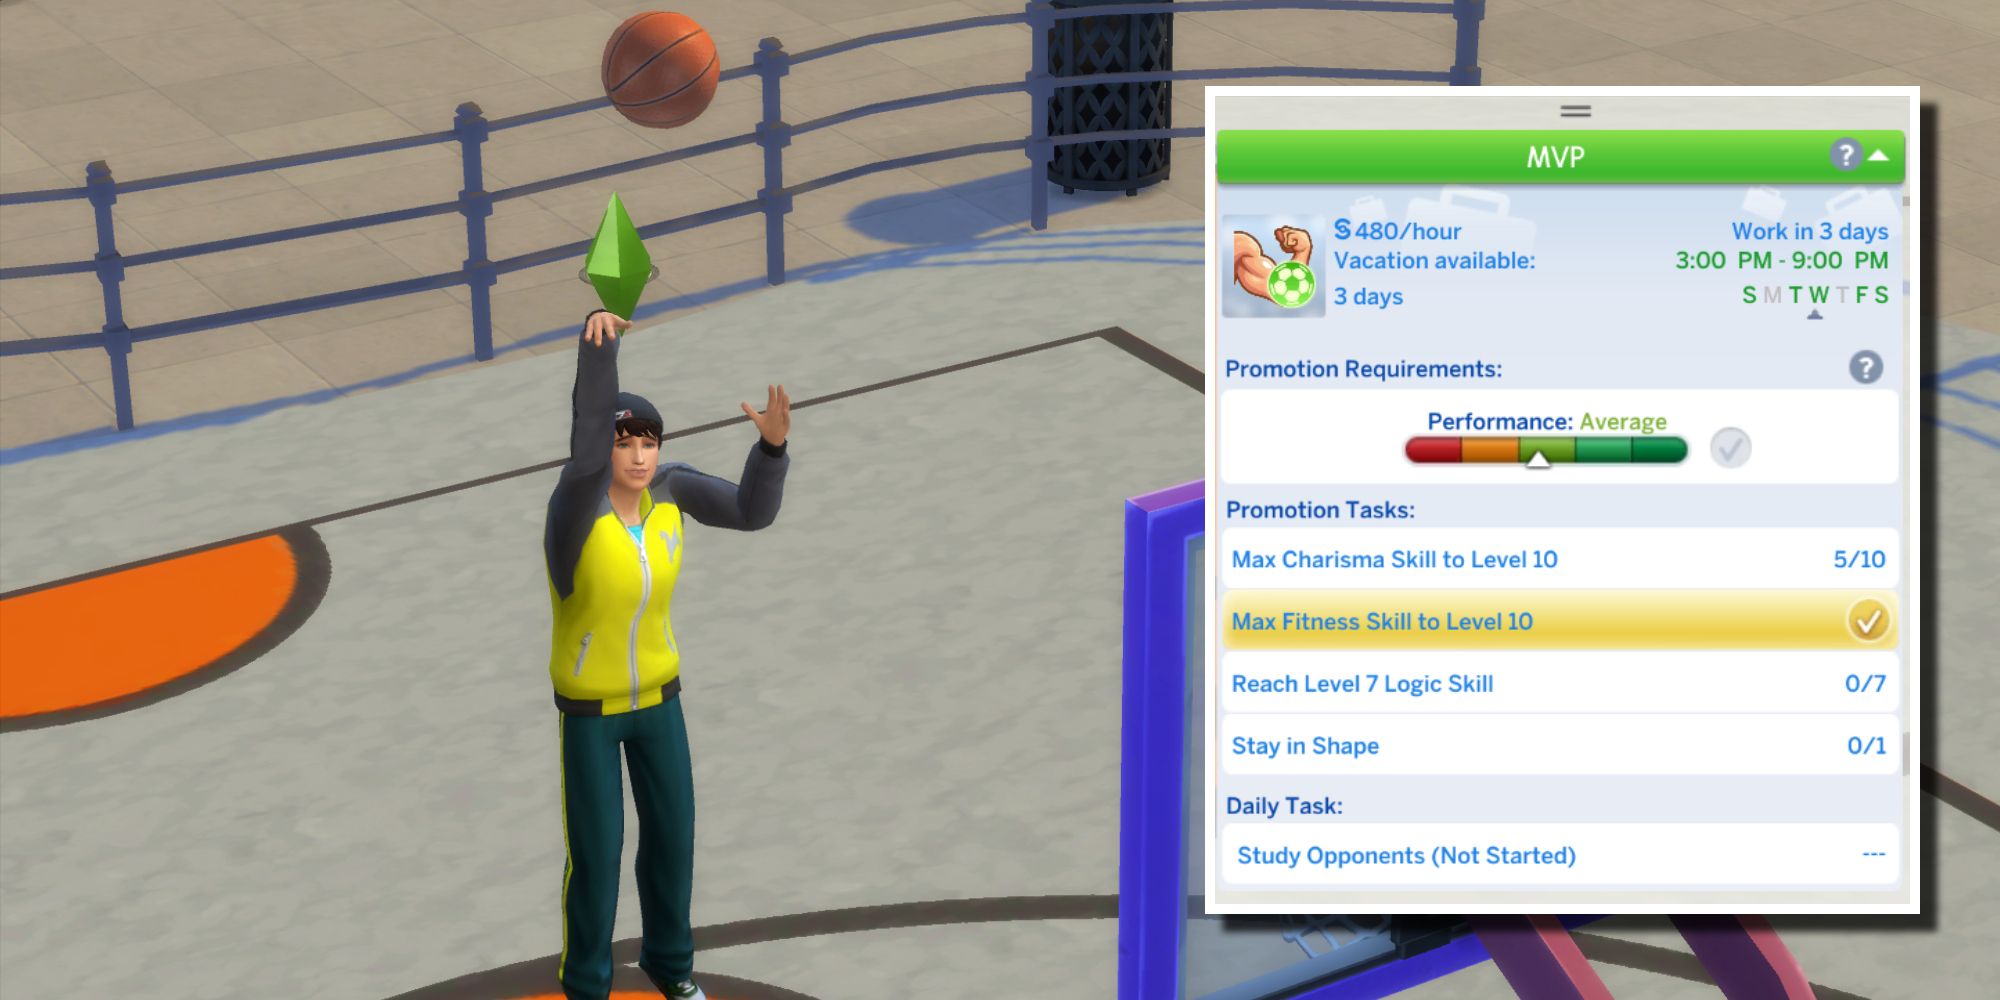 With the Career Overhaul Suite Mod, Sims will more challenges to face in order to get promoted in their careers. Take this athlete, for example, who must keep up on several skills and stay in shape to get promoted.